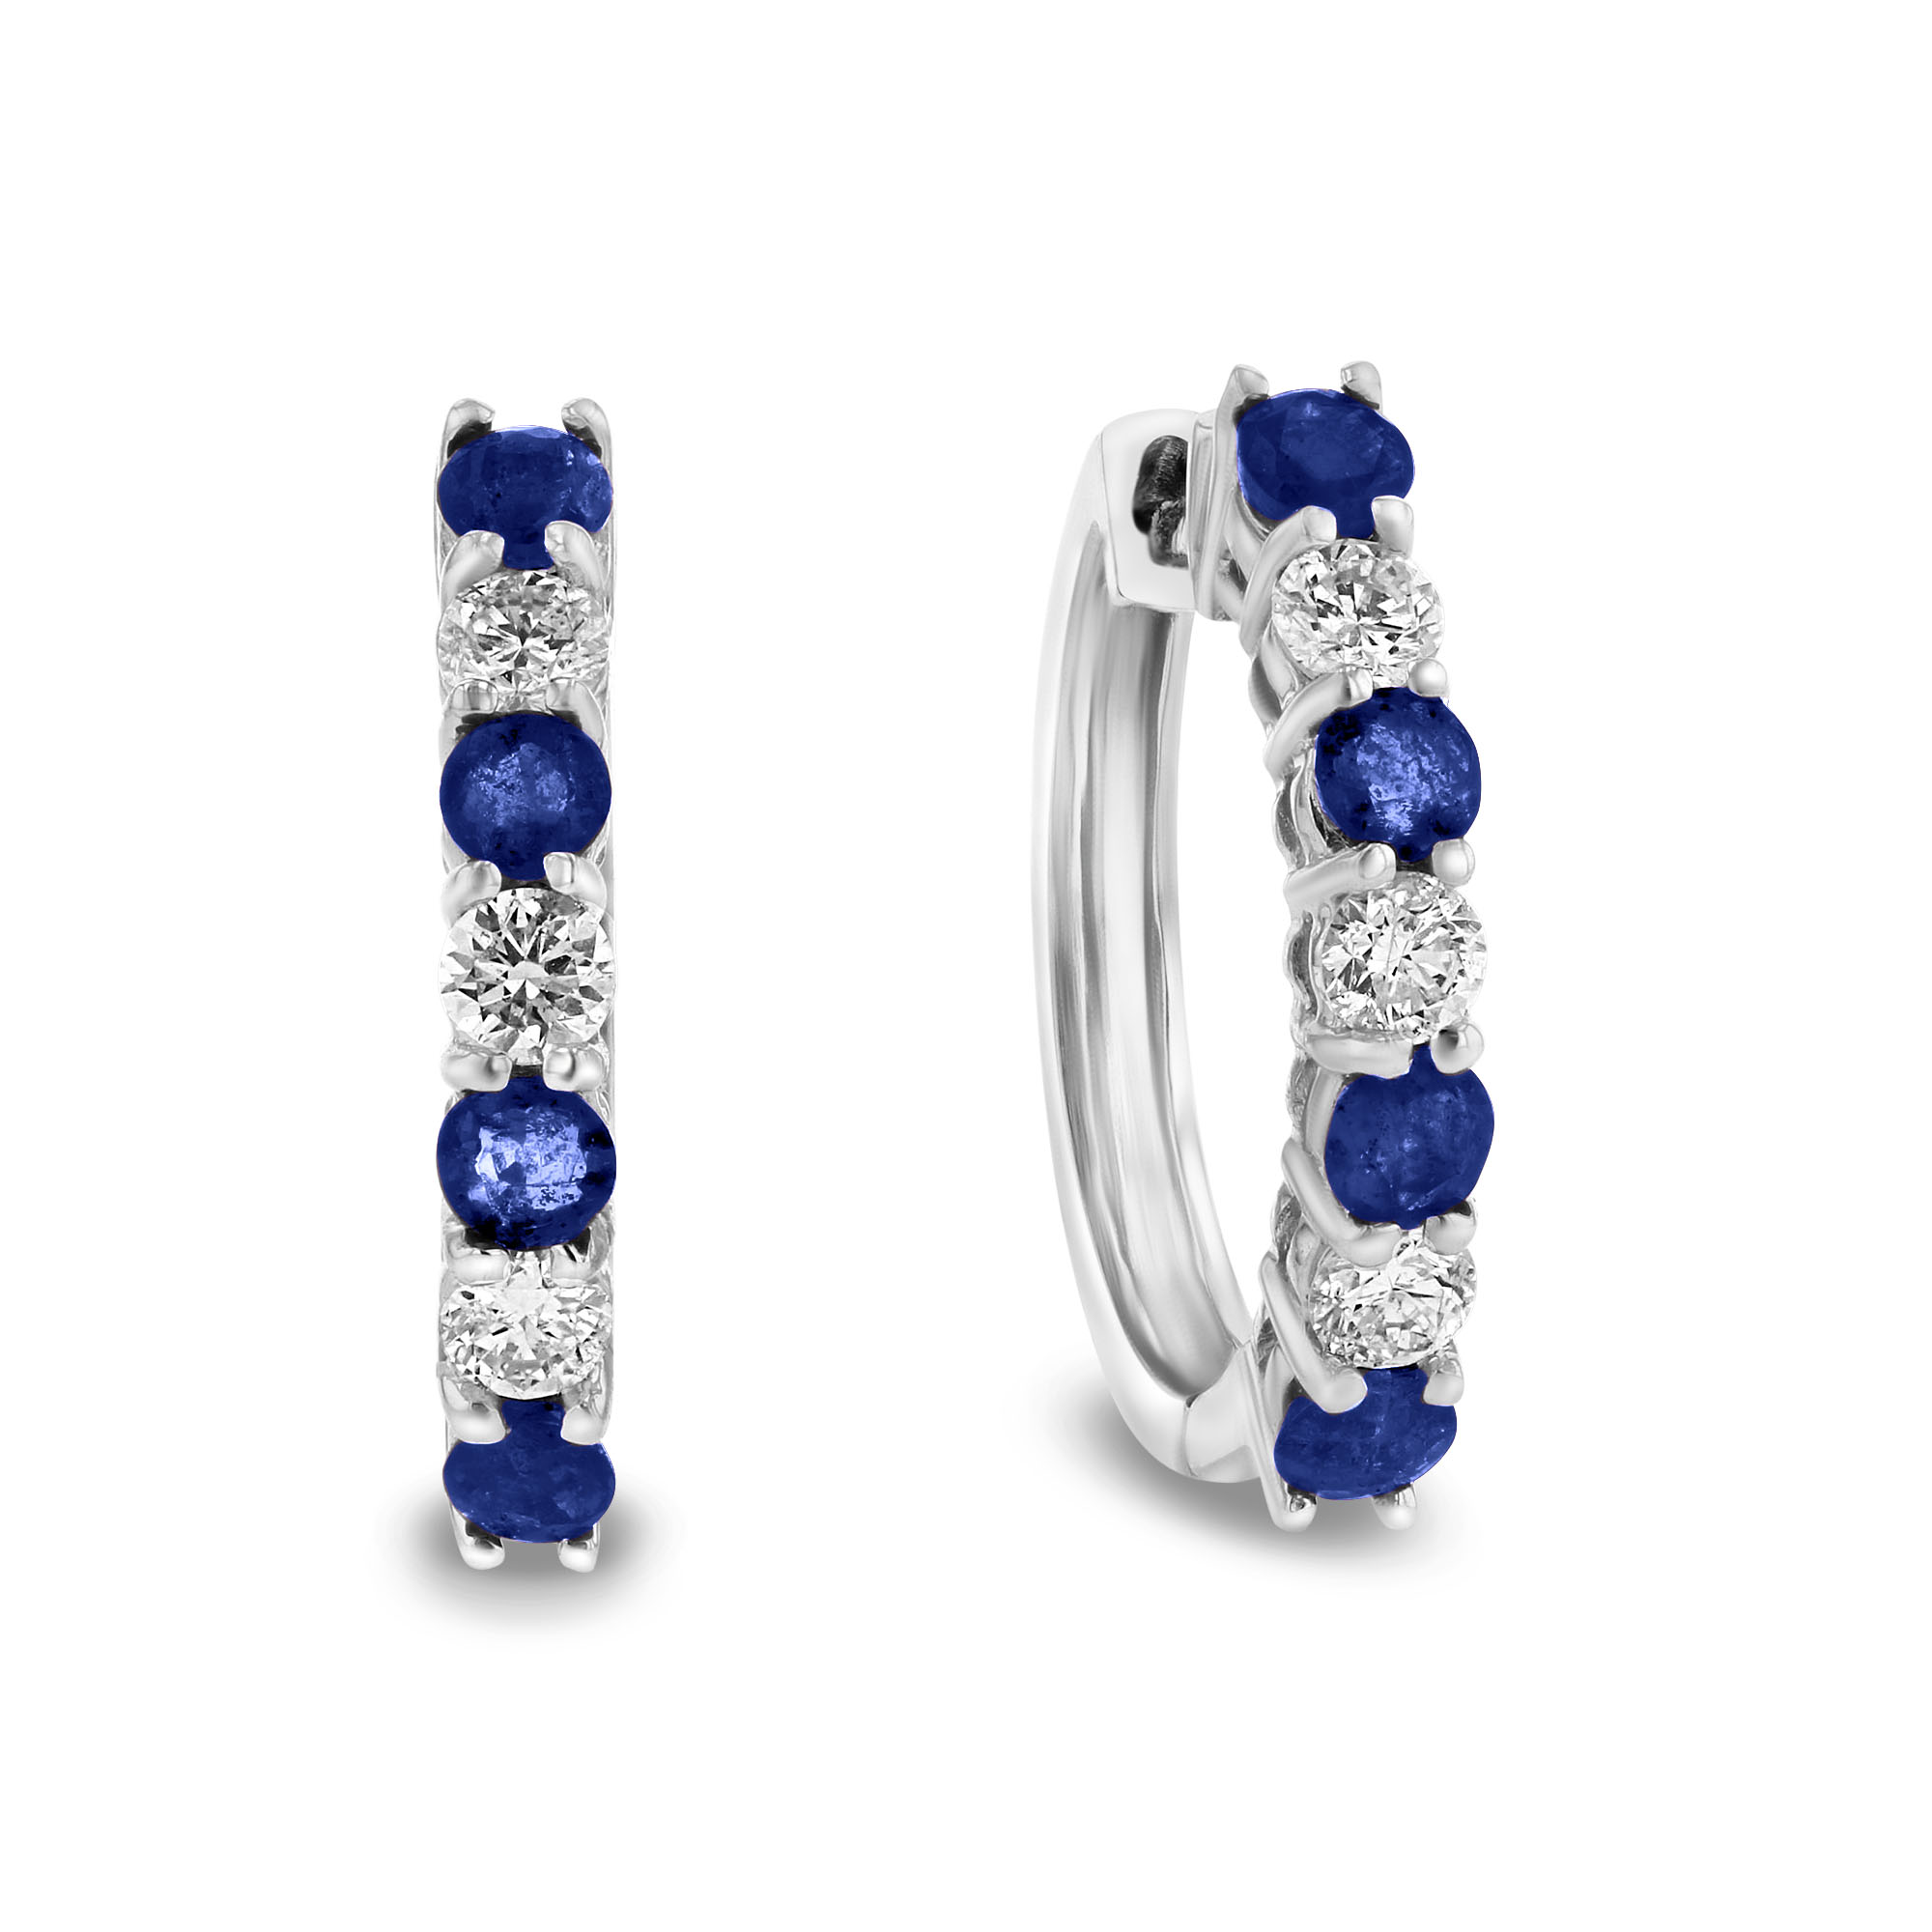 View 1.15ctw Diamond and Sapphire Hoop Earrings in 14k White Gold